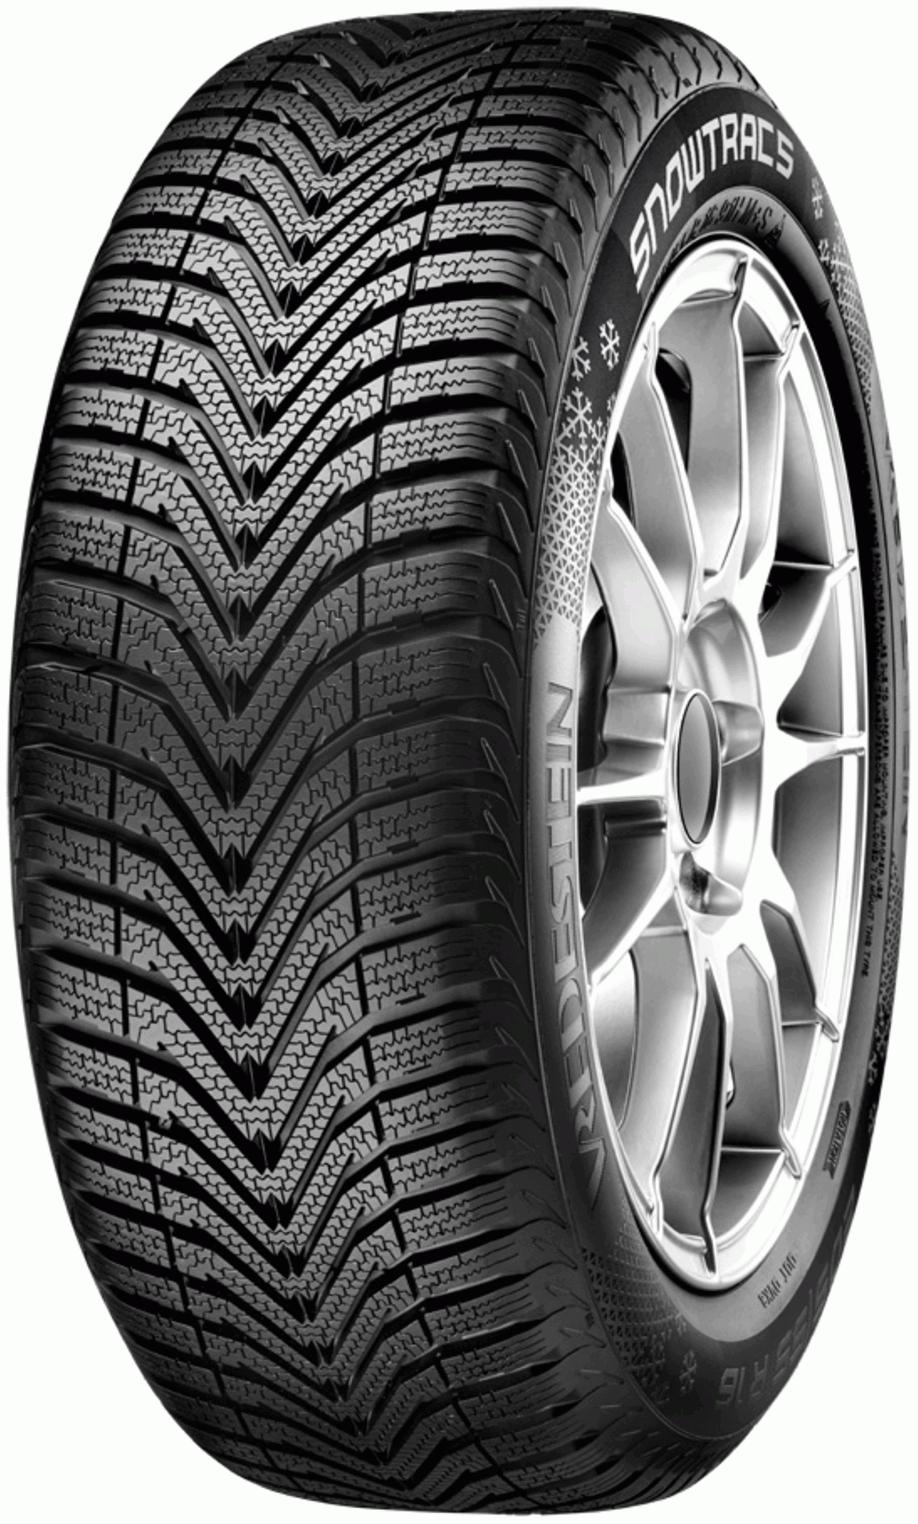 5 Tire Tests Vredestein and Reviews - Snowtrac